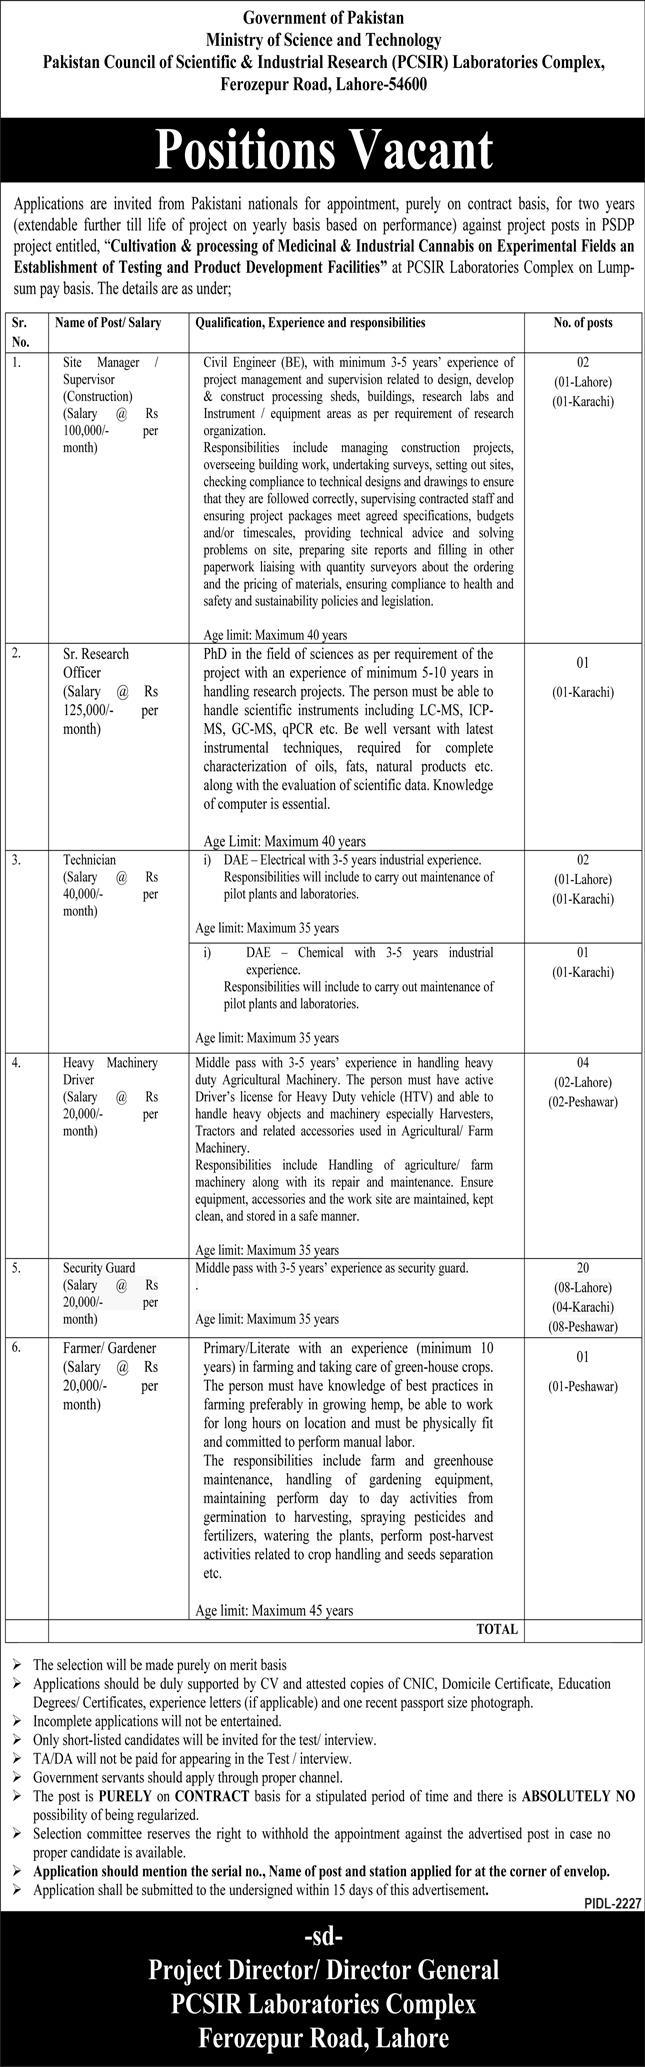 Vacancies Available at Pakistan Council of Scientific and Industrial Research Laboratories Complex